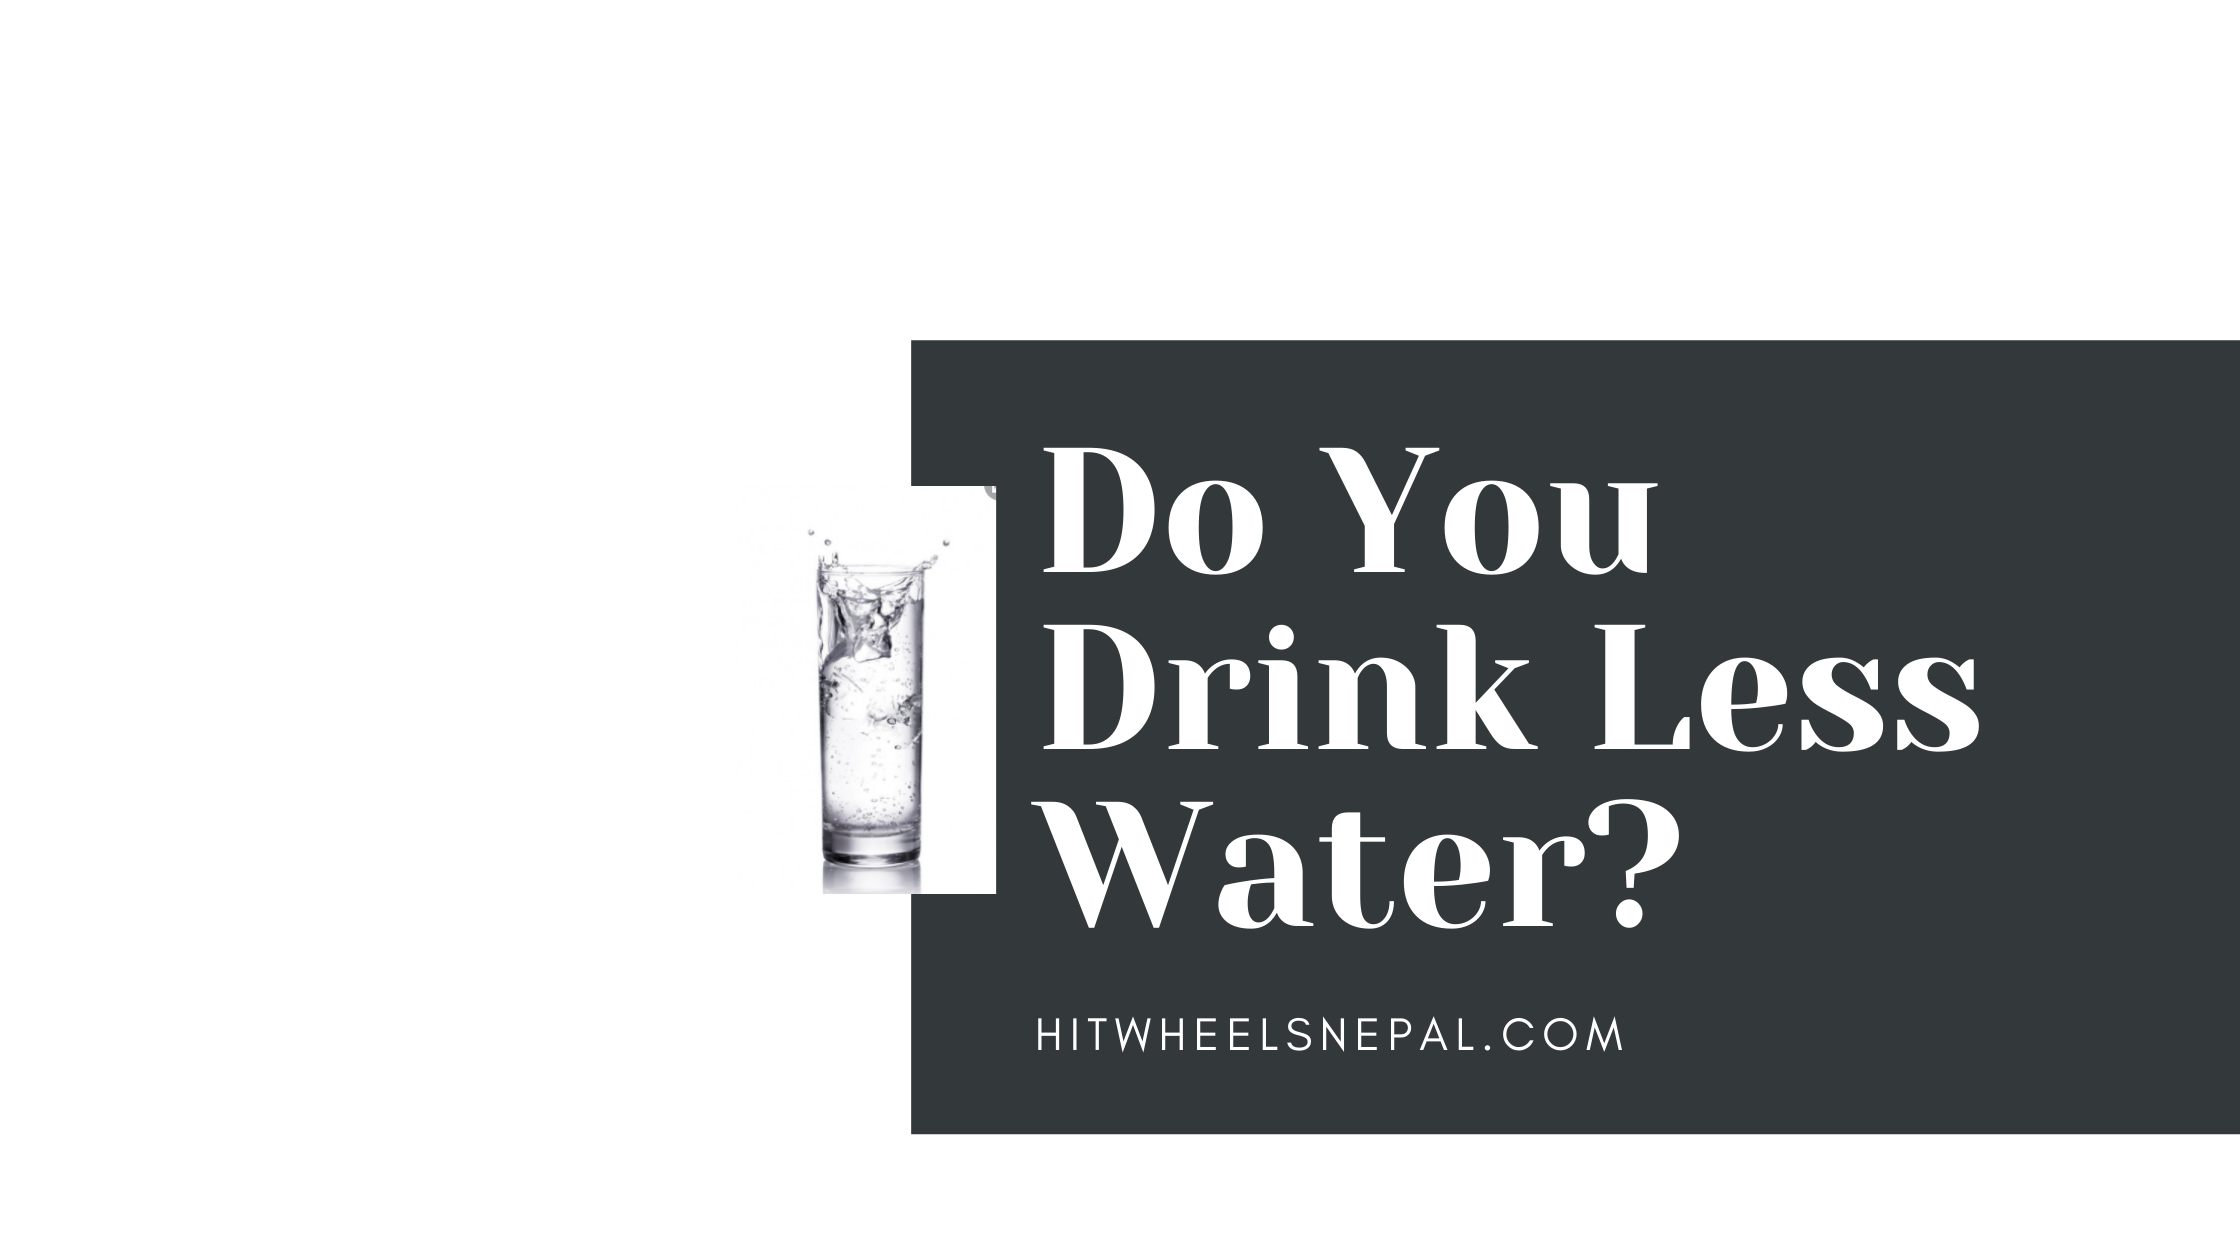 Do You Drink Less Water?